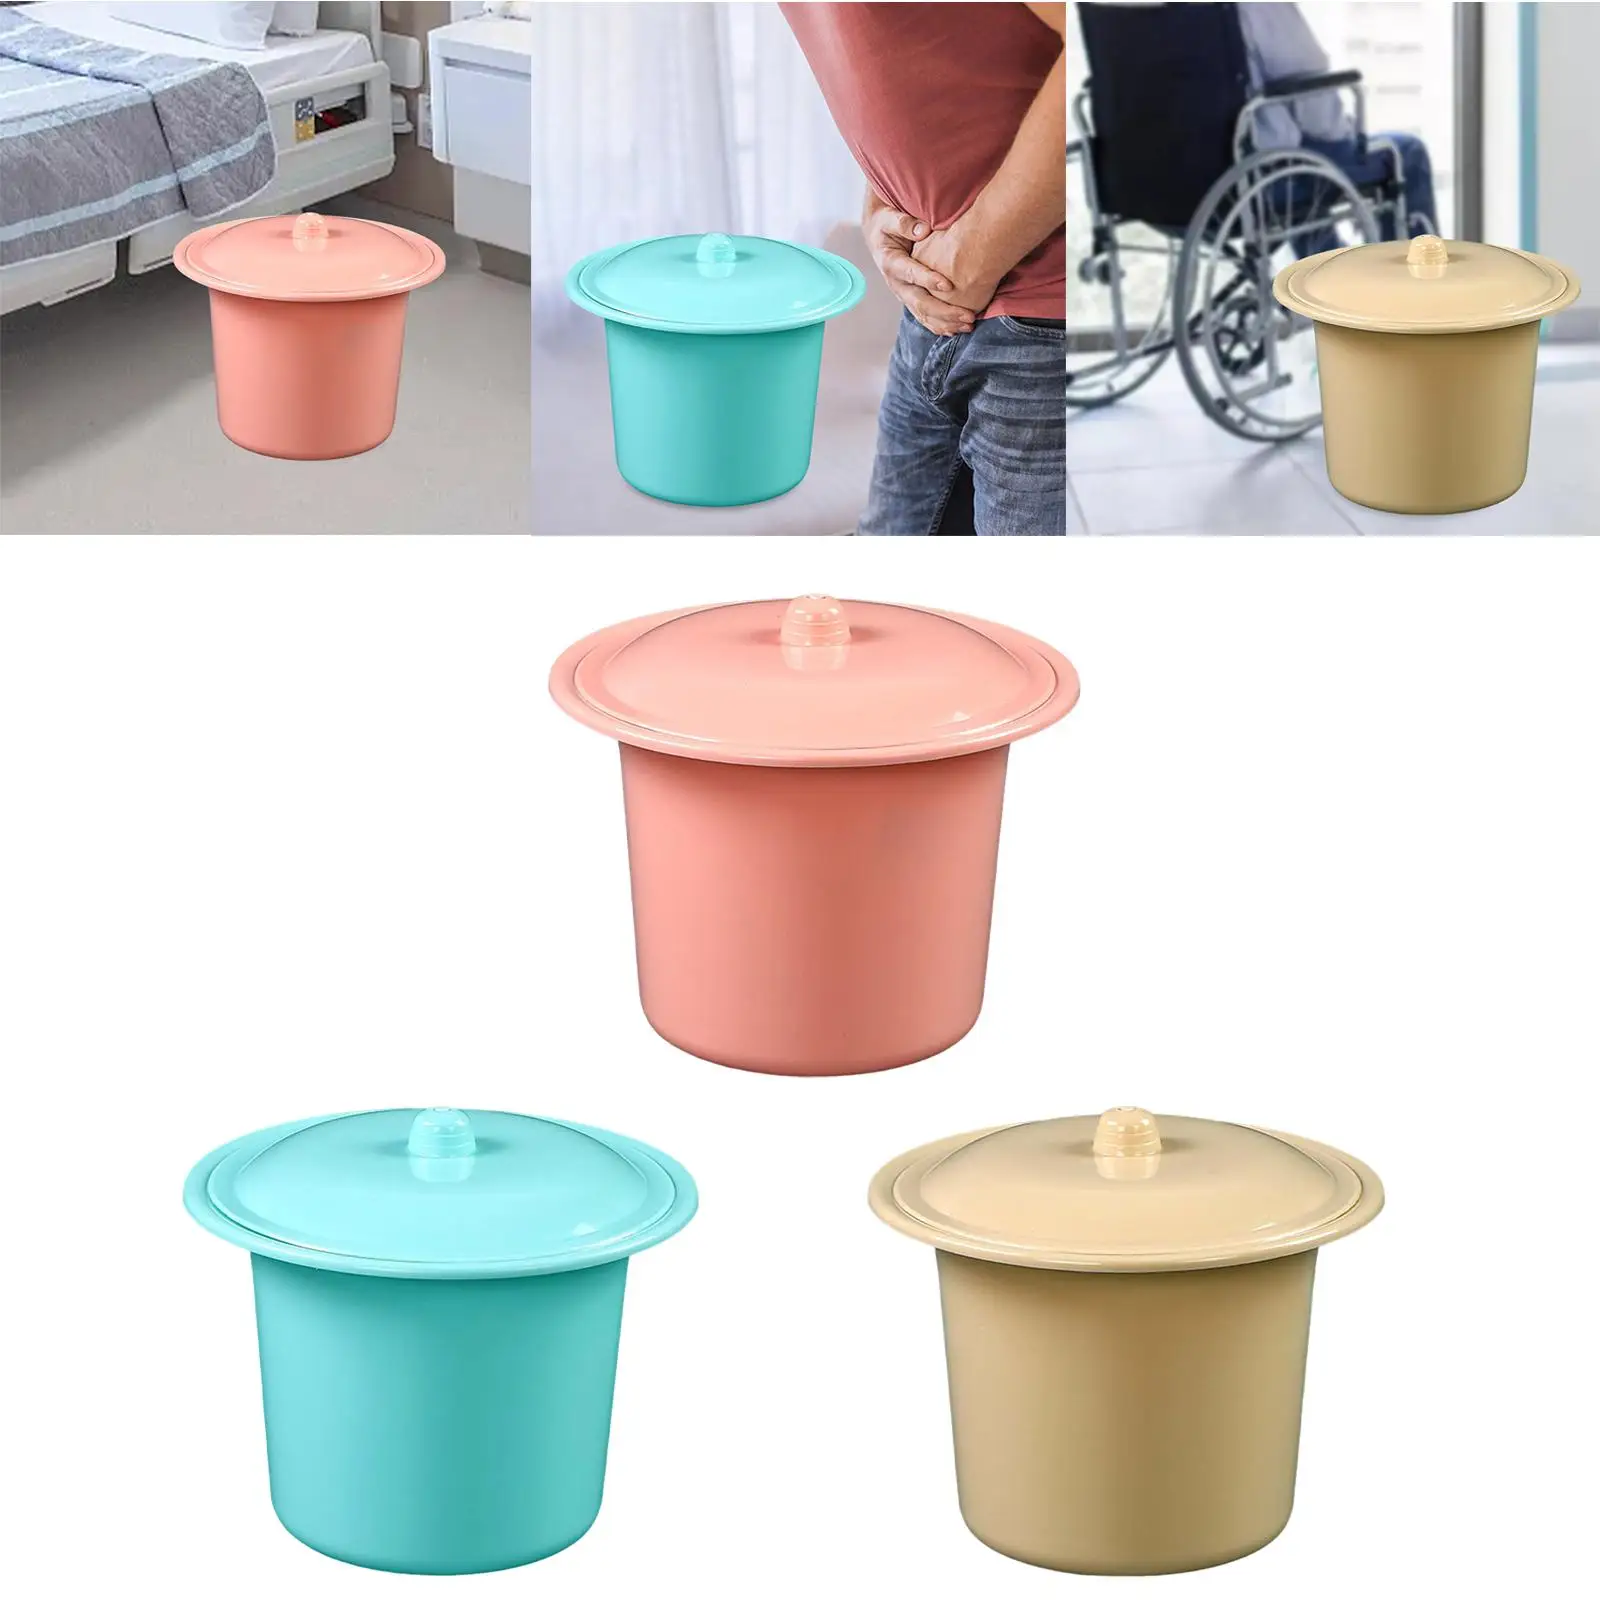 Compact Spittoon with Lid Splashproof Durable Urinal Pot Pee Potty Mobile Toilet for Outdoor Emergency Camping Car Elderly